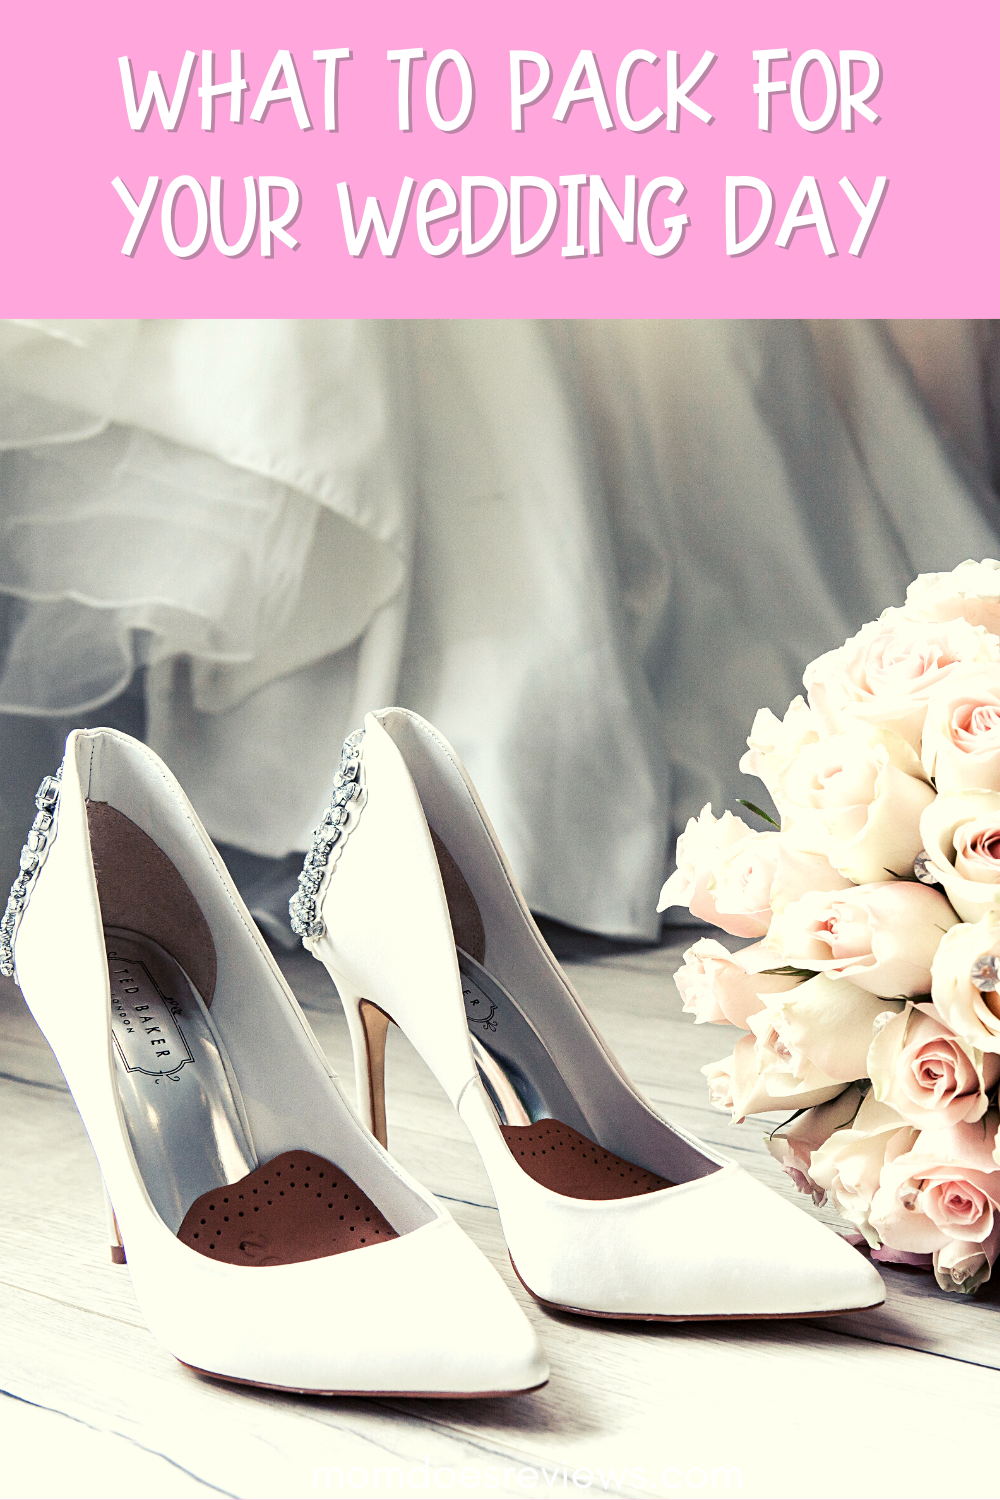 What to Pack for your Wedding Day